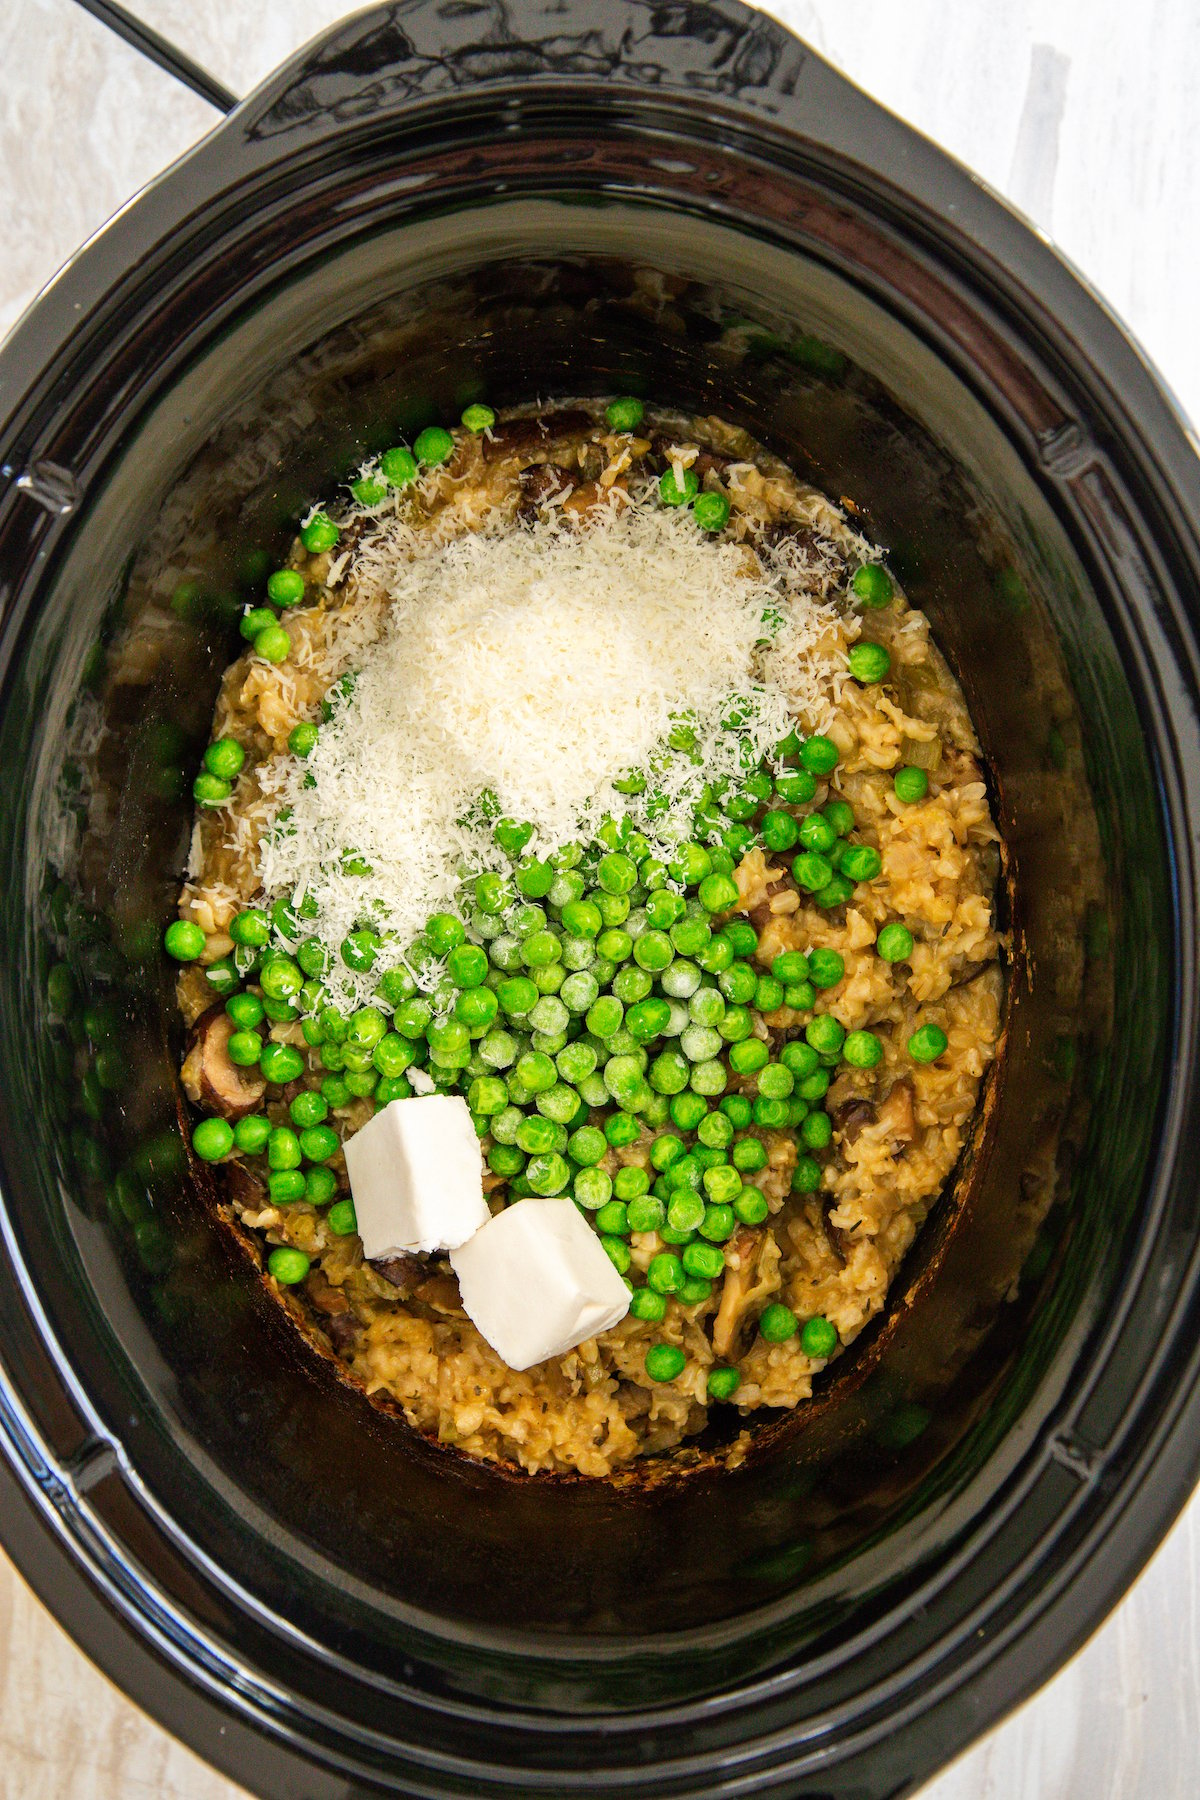 Peas, parmesan, and butter in a crockpot.